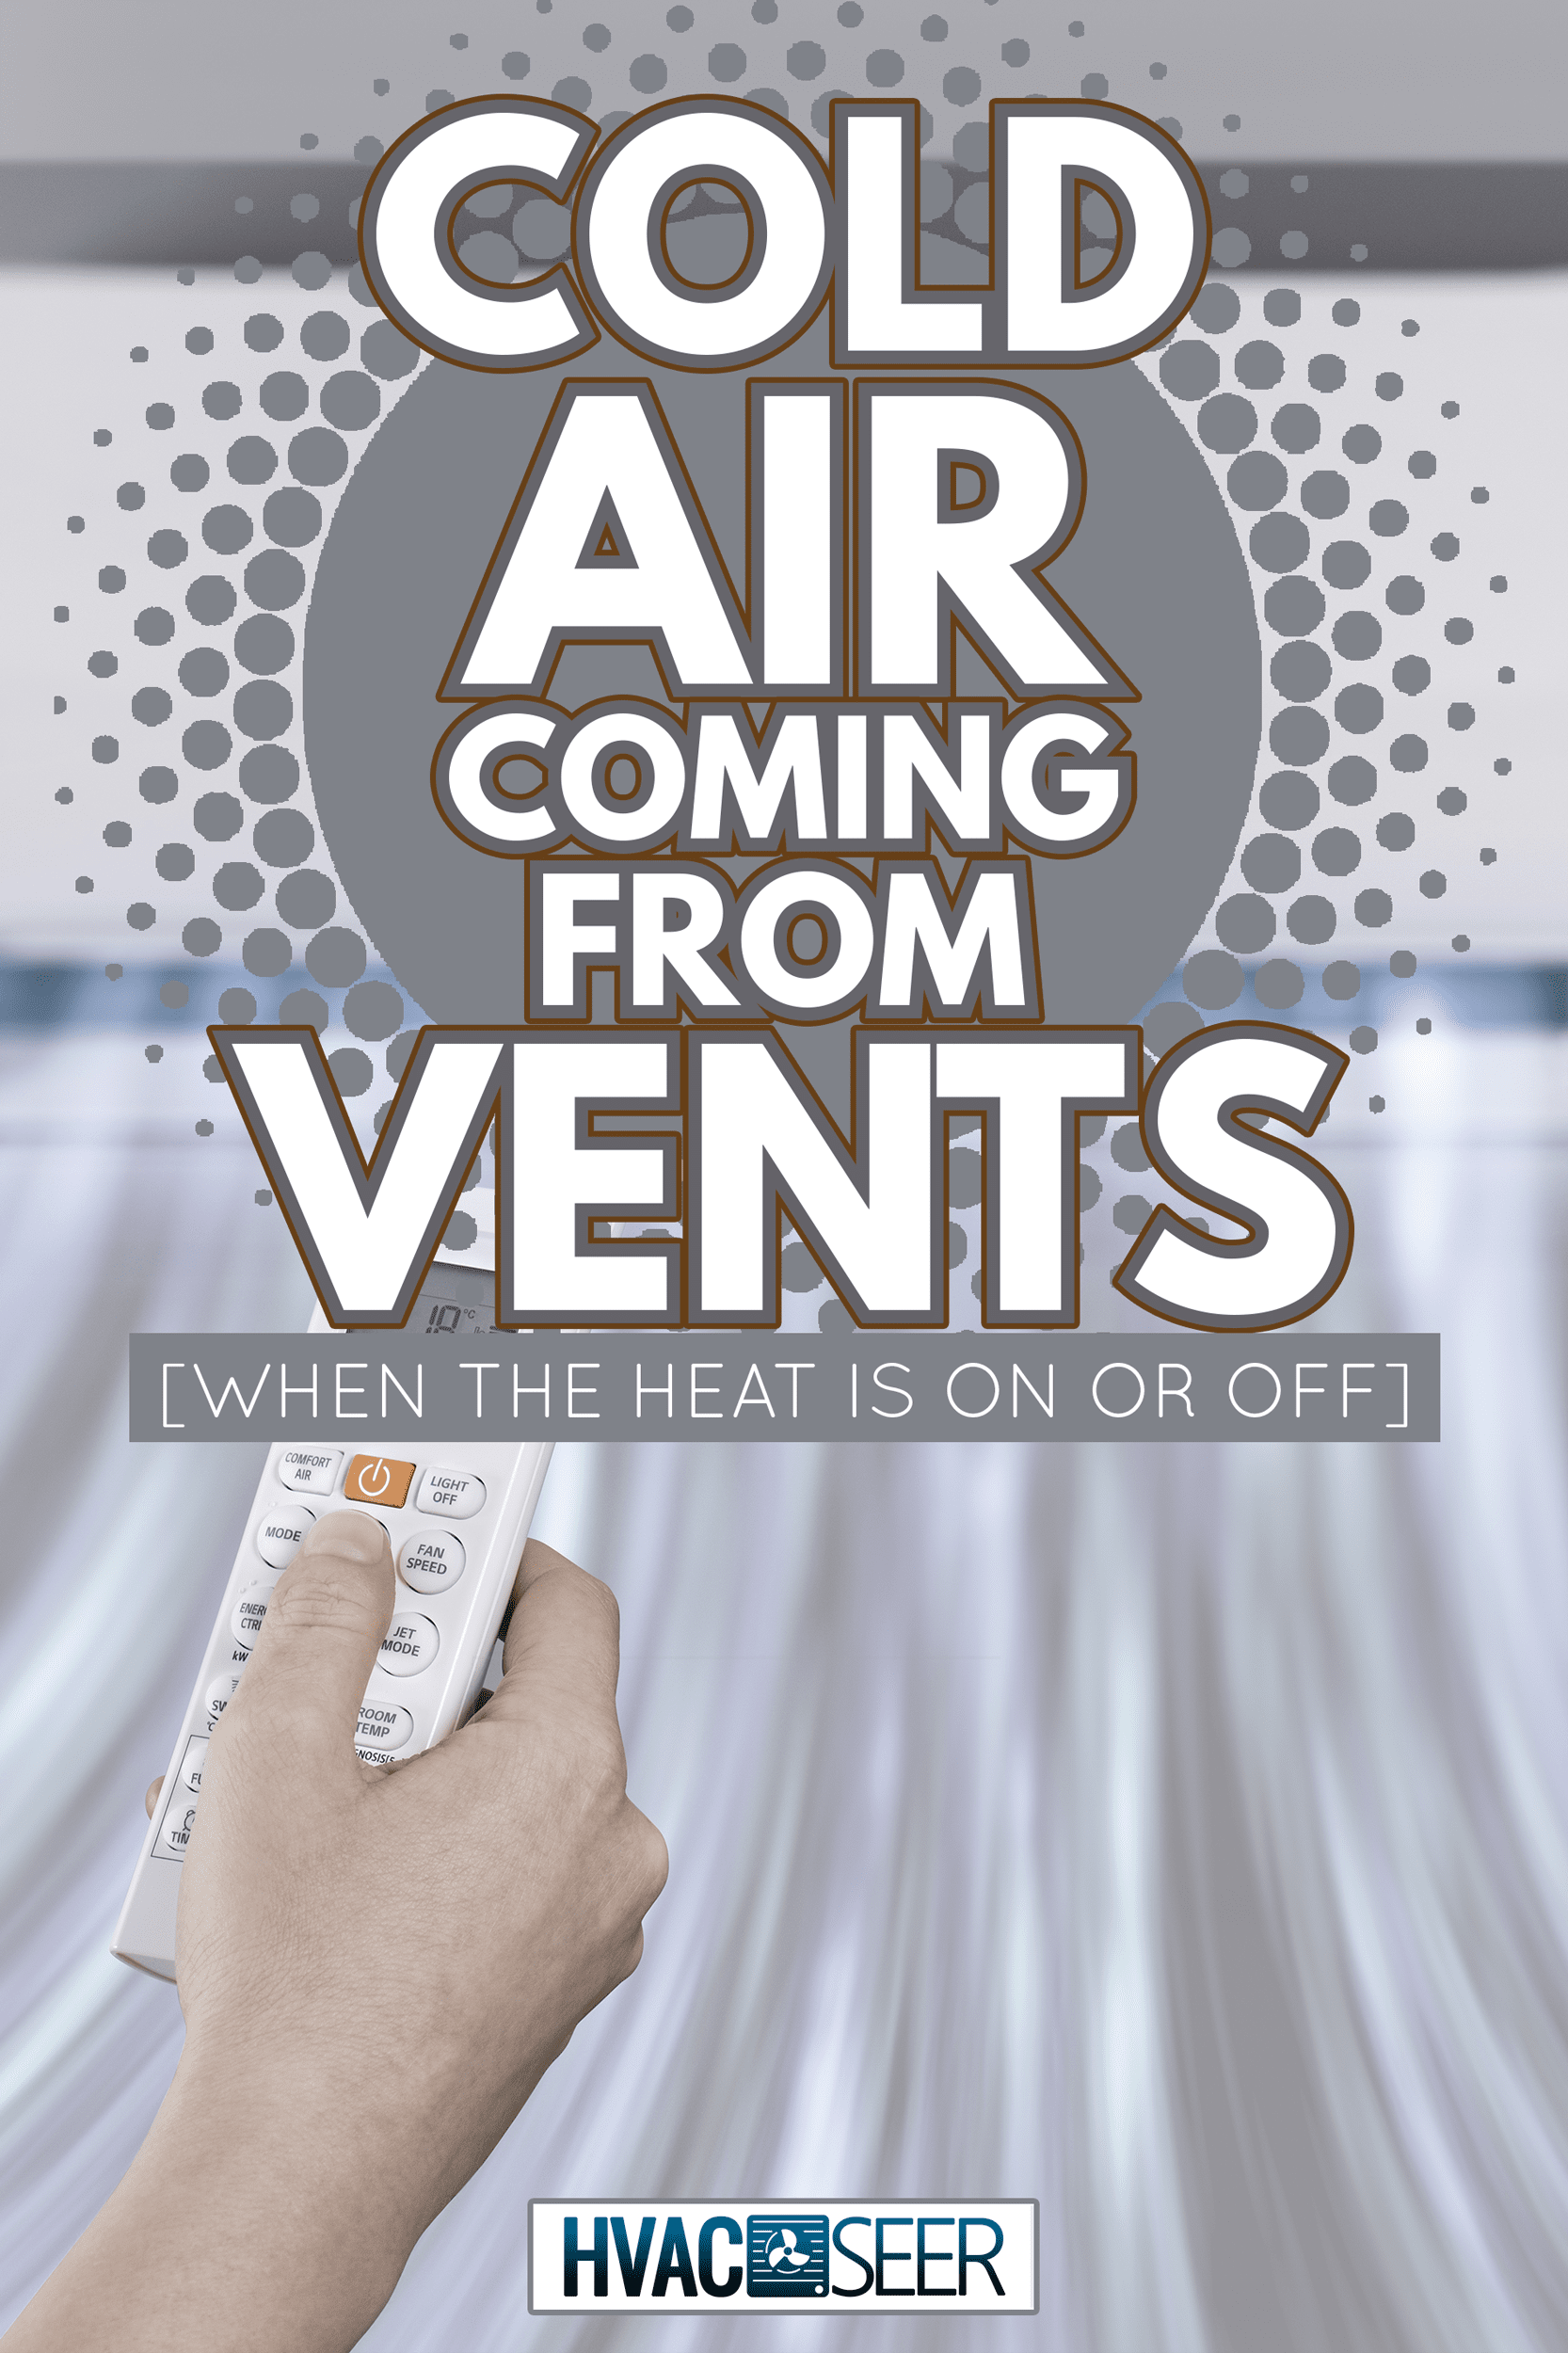 Air Conditioner, Wind, Heat - Temperature, Refreshment, Remote Control - Cold Air Coming From Vents [When The Heat Is On Or Off]